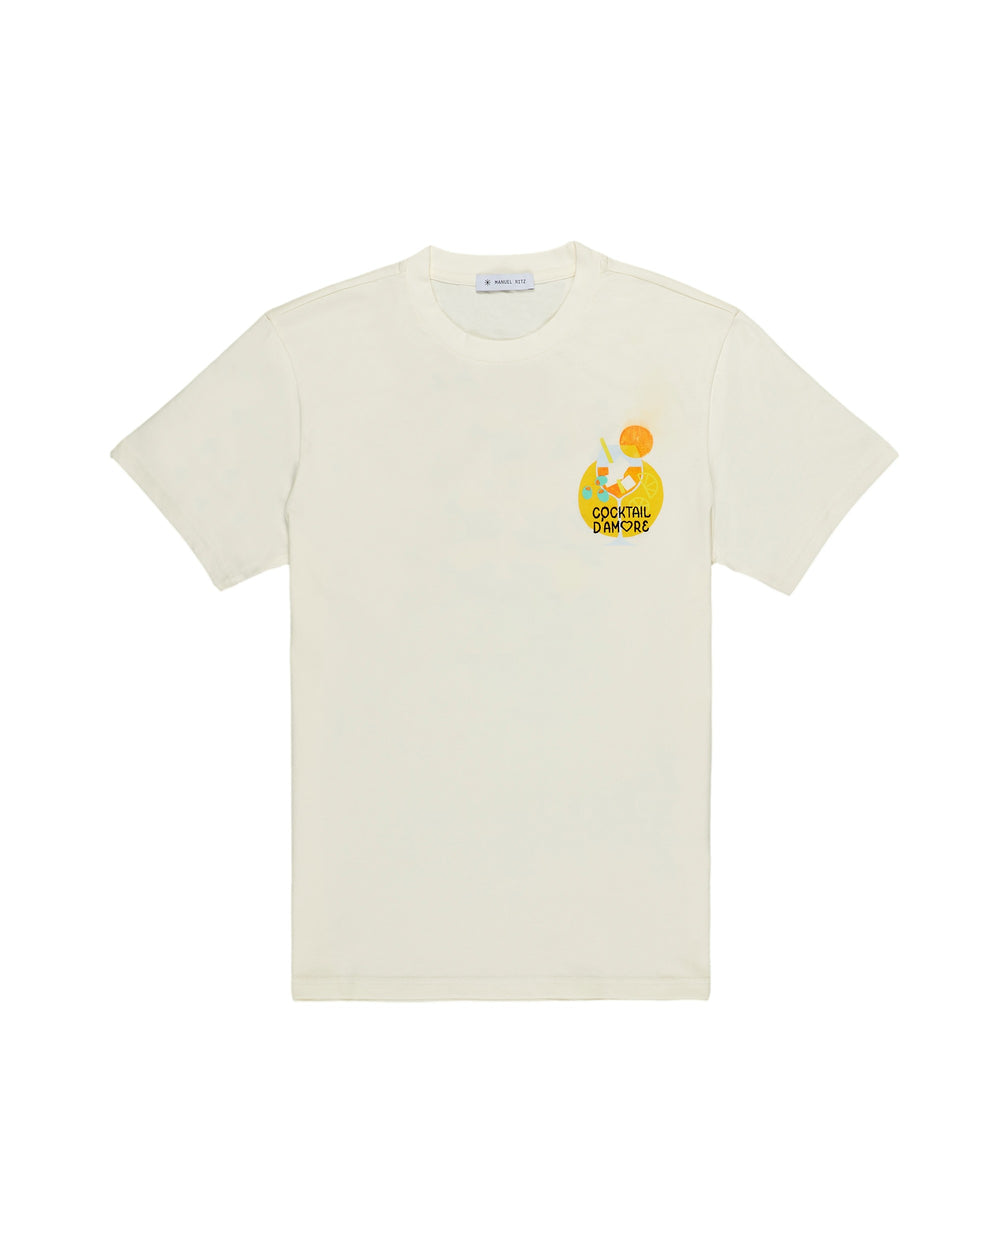 white cotton 'cocktail of love' t-shirt